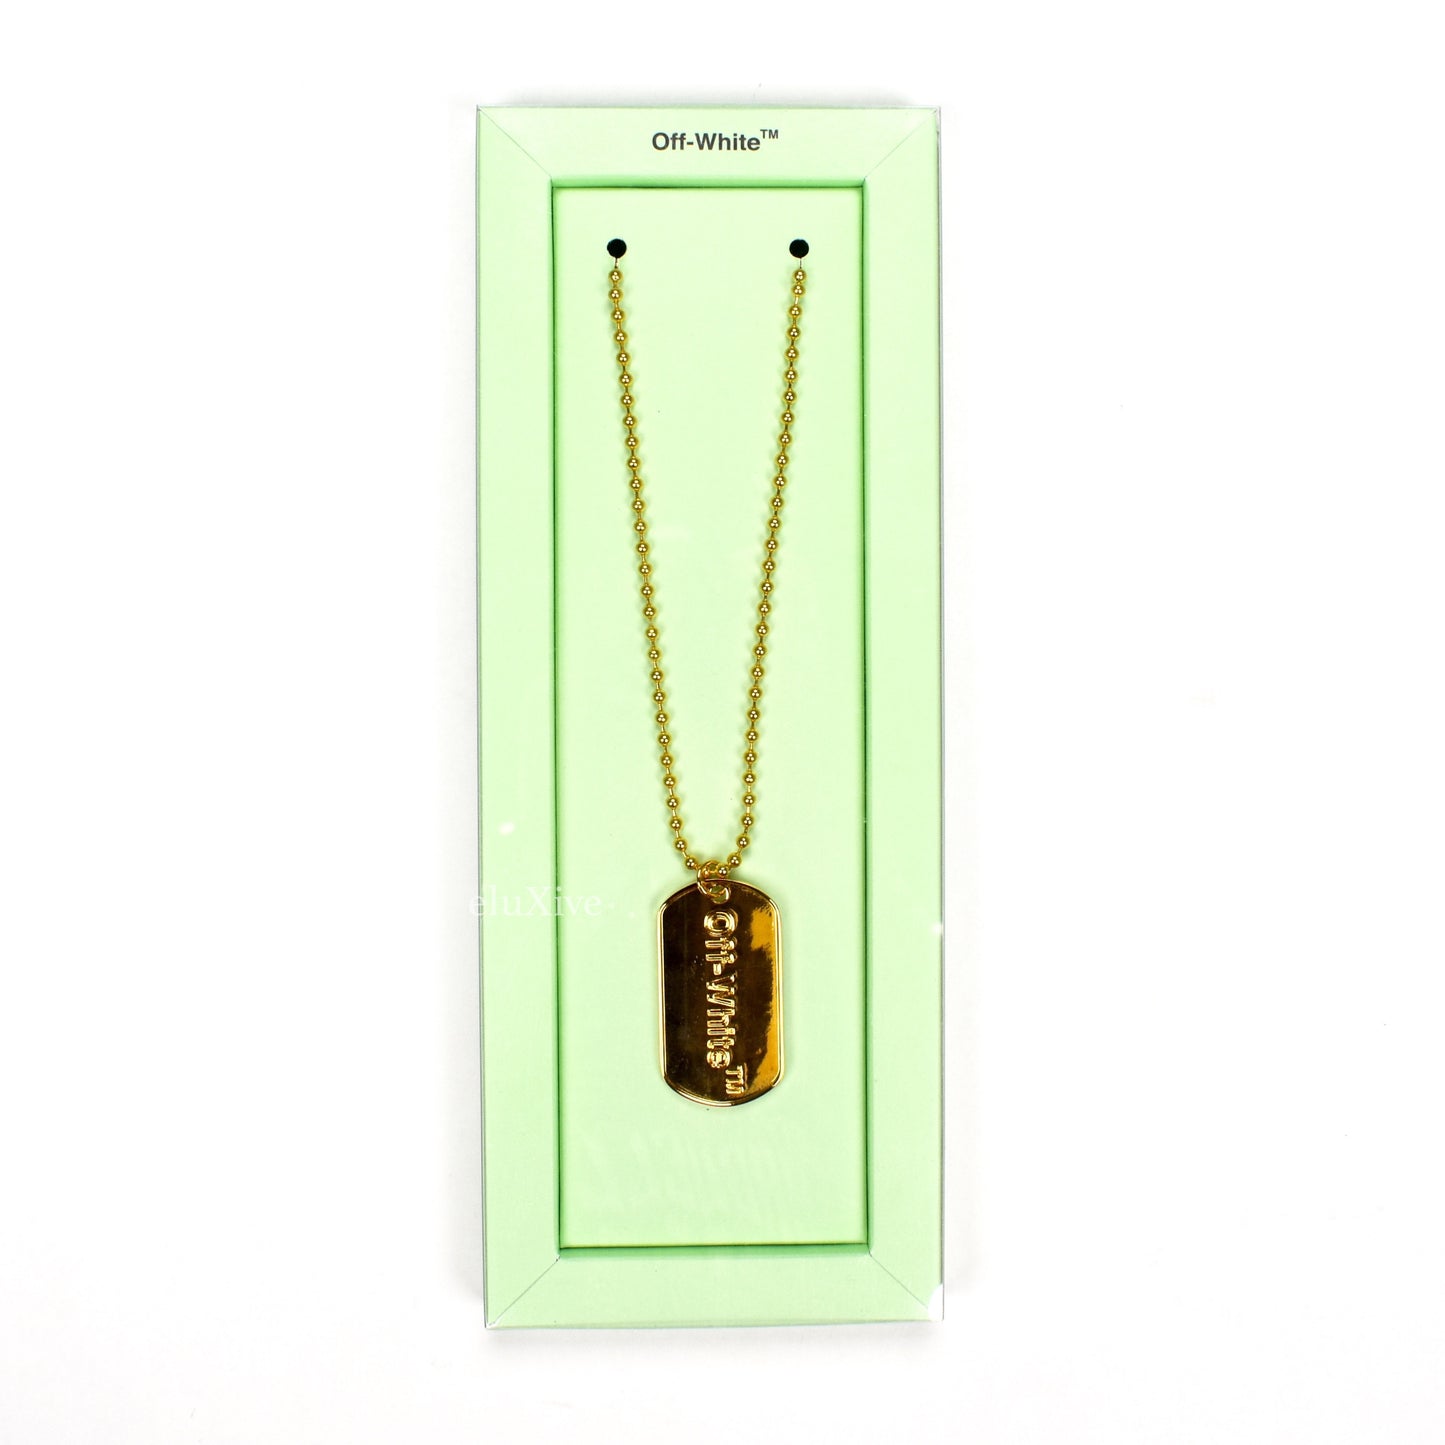 Off-White - Gold Logo Dog Tag Chain Necklace